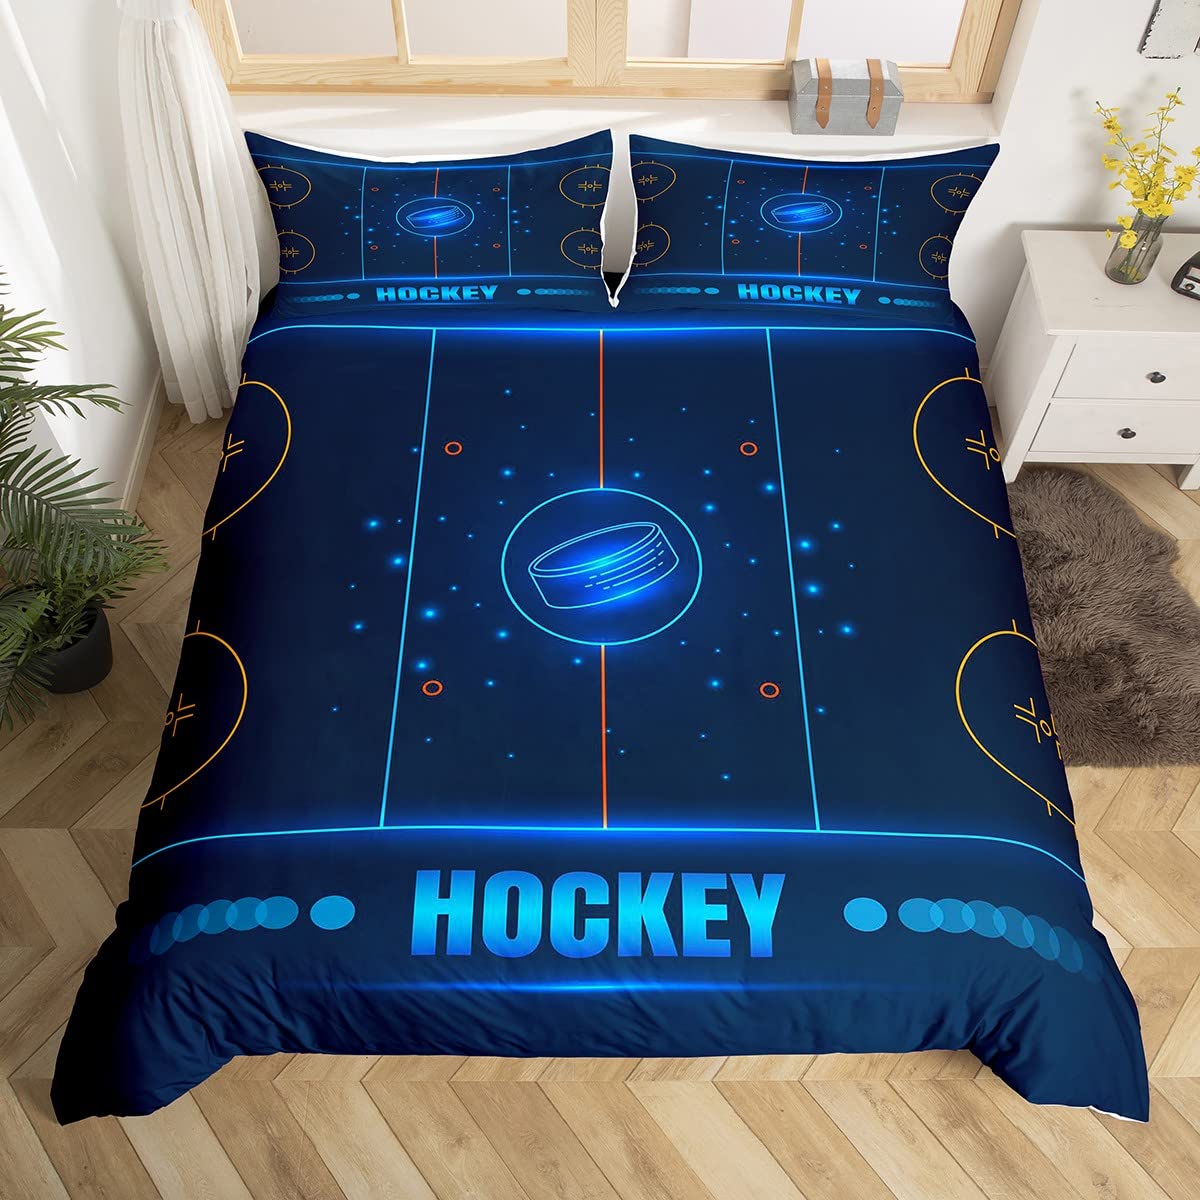 Ice Hockey Sports King Queen Duvet Cover Burning Hockey Ball Bedding Set for Teens Athlete Black 2/Polyester Quilt Cover